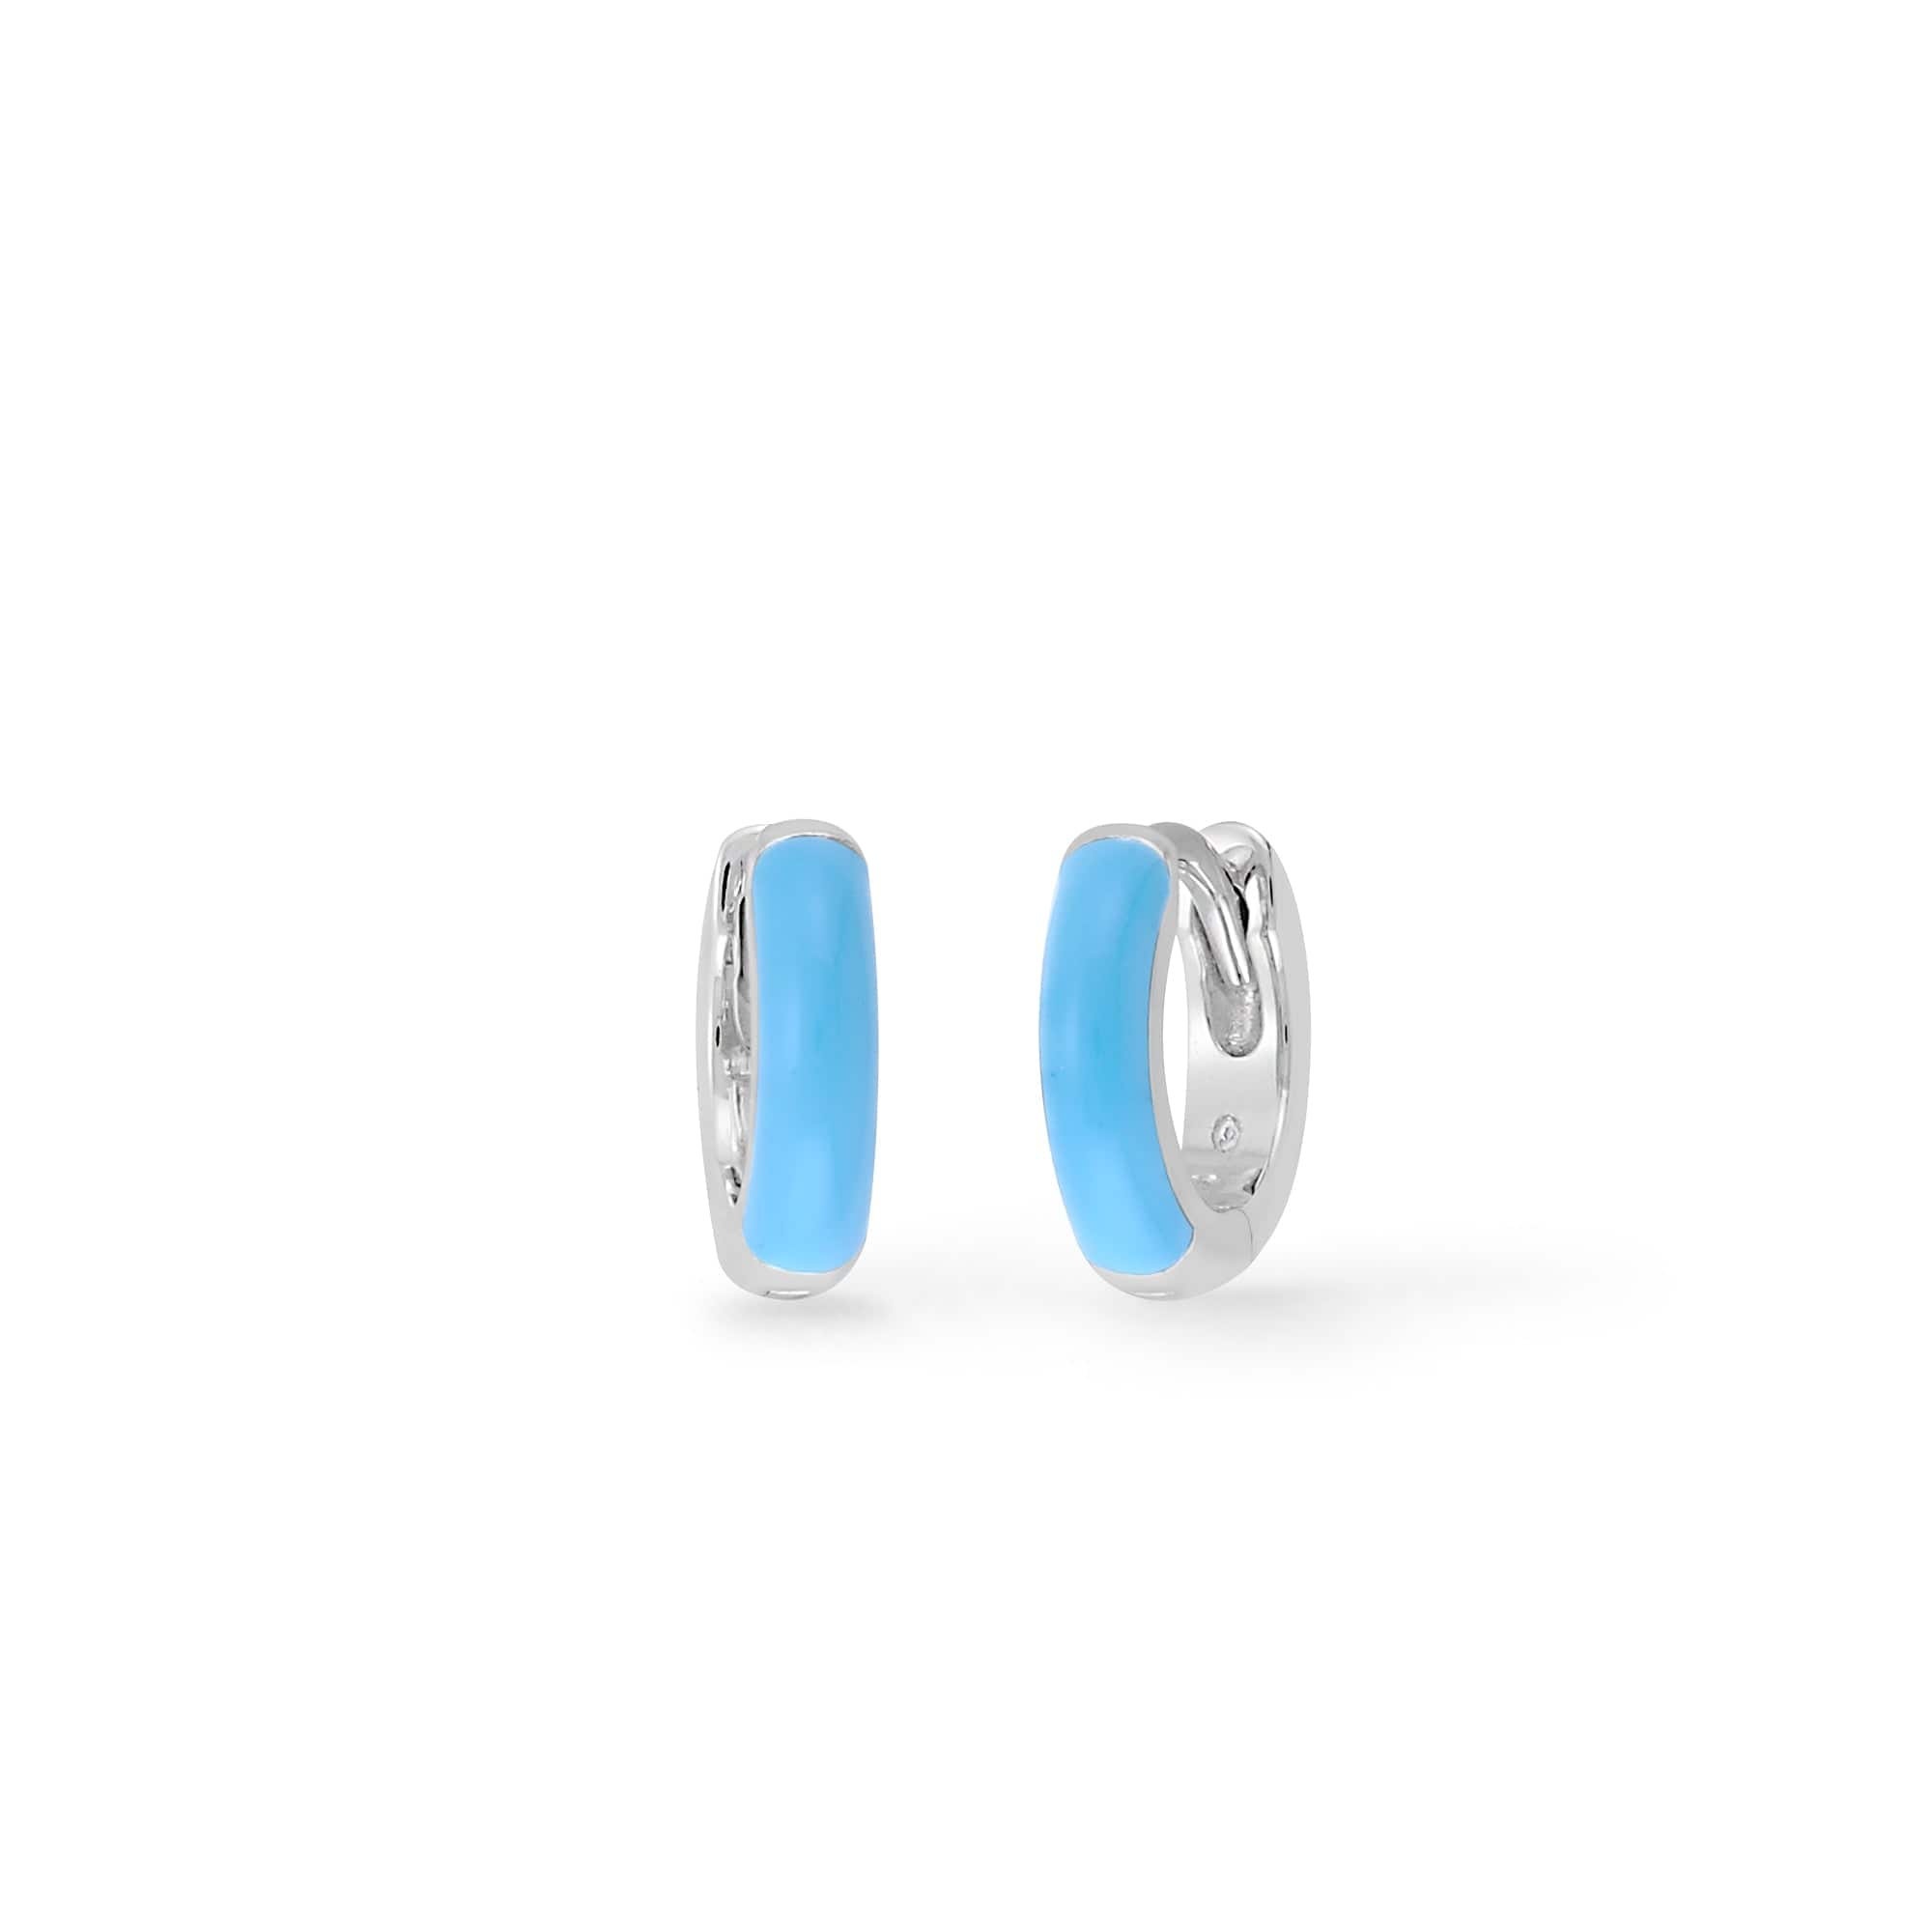 Boma Jewelry Earrings Light blue / Sterling Silver Mini Huggie Hoops with Color